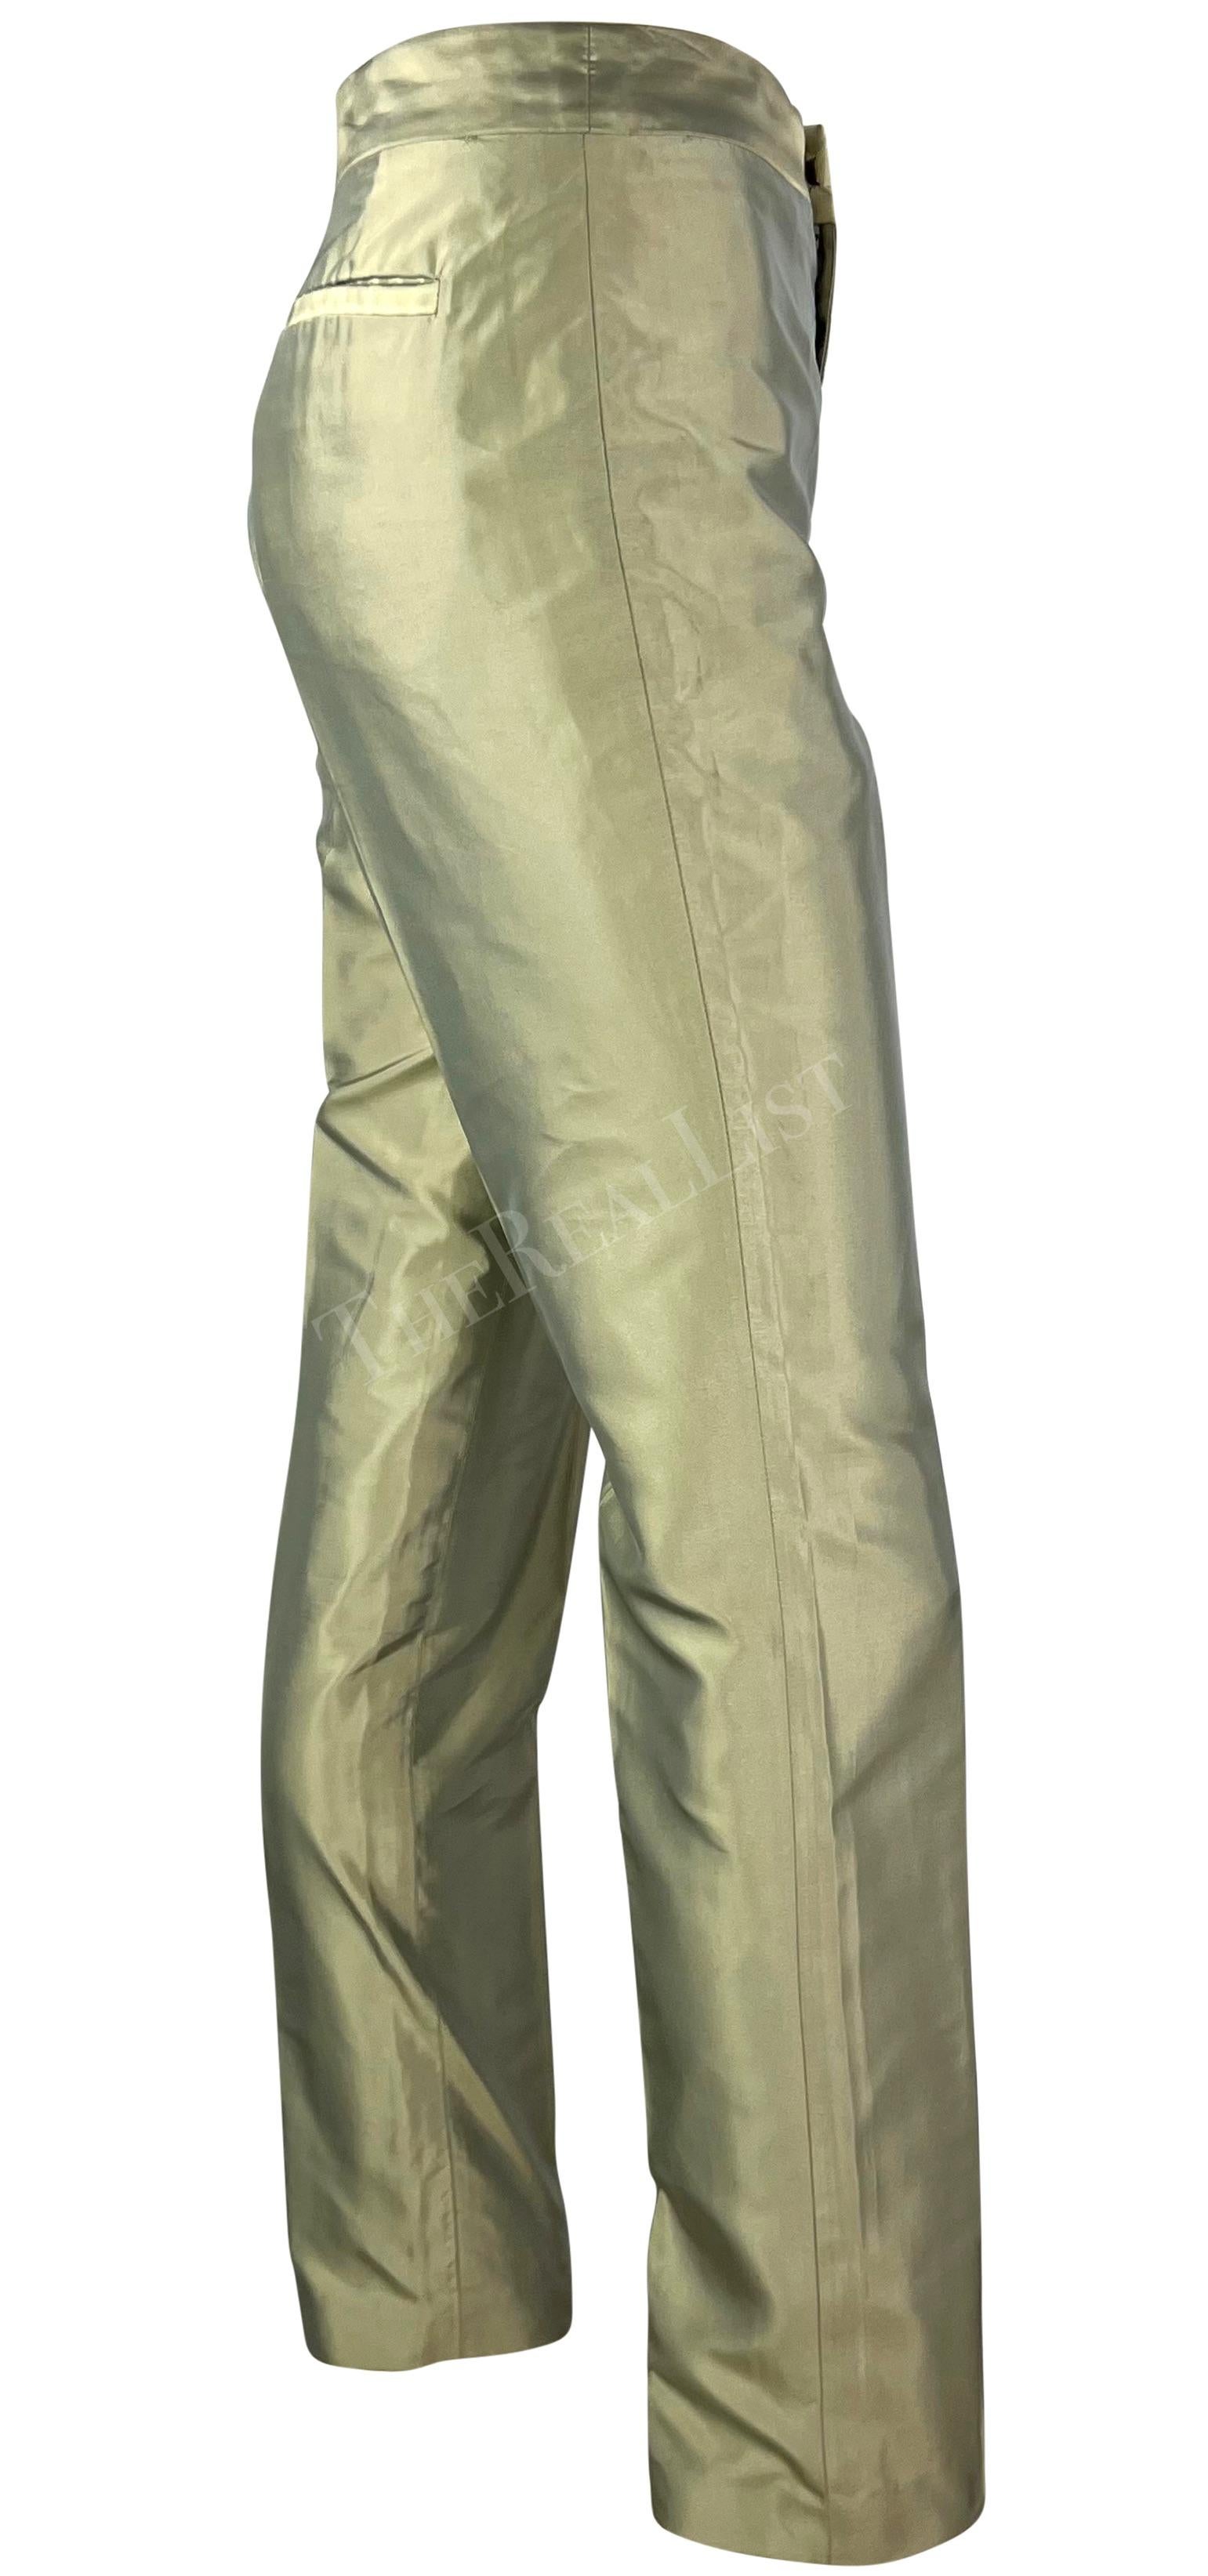 S/S 2000 Gucci by Tom Ford Light Green Iridescent Silk Straight Leg Pants For Sale 2